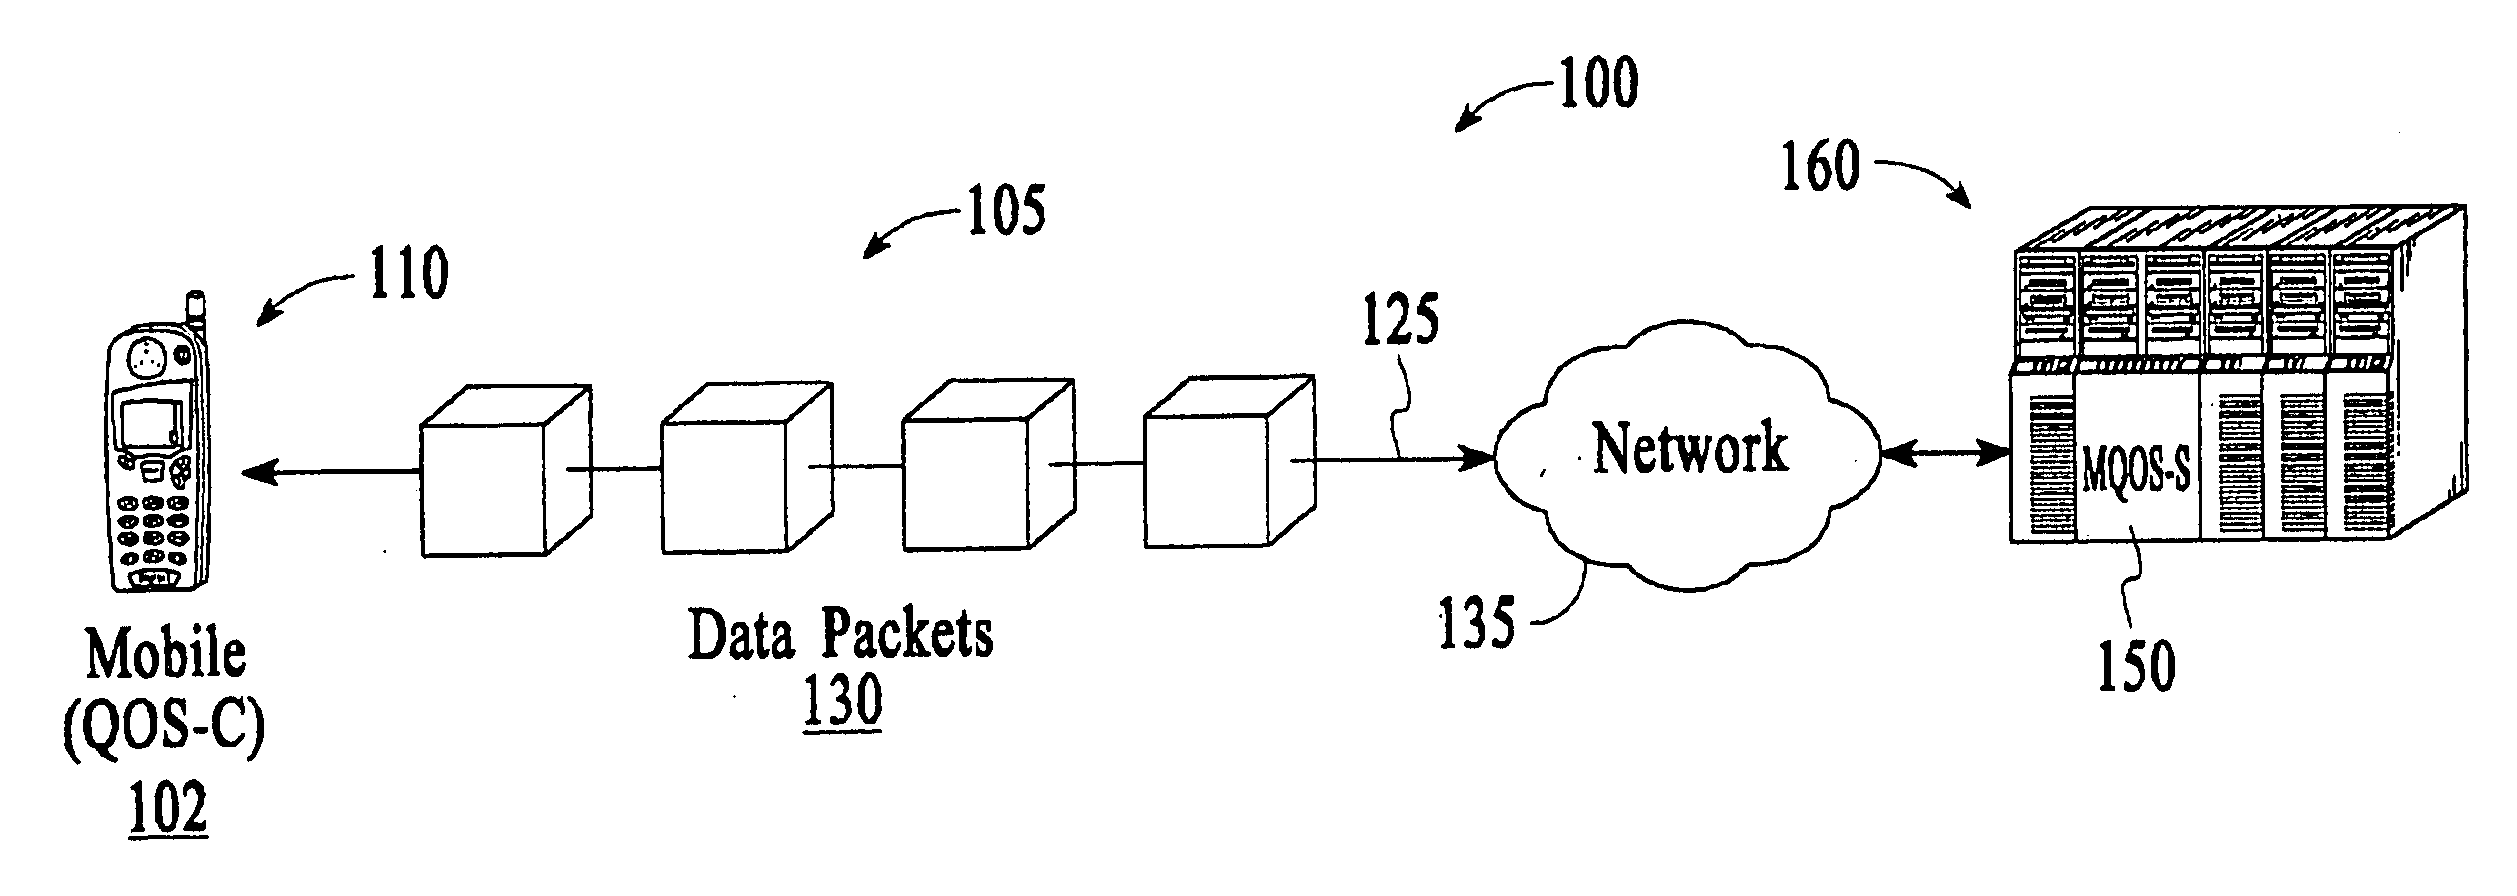 Method and system for Quality of Service (QoS) monitoring for wireless devices